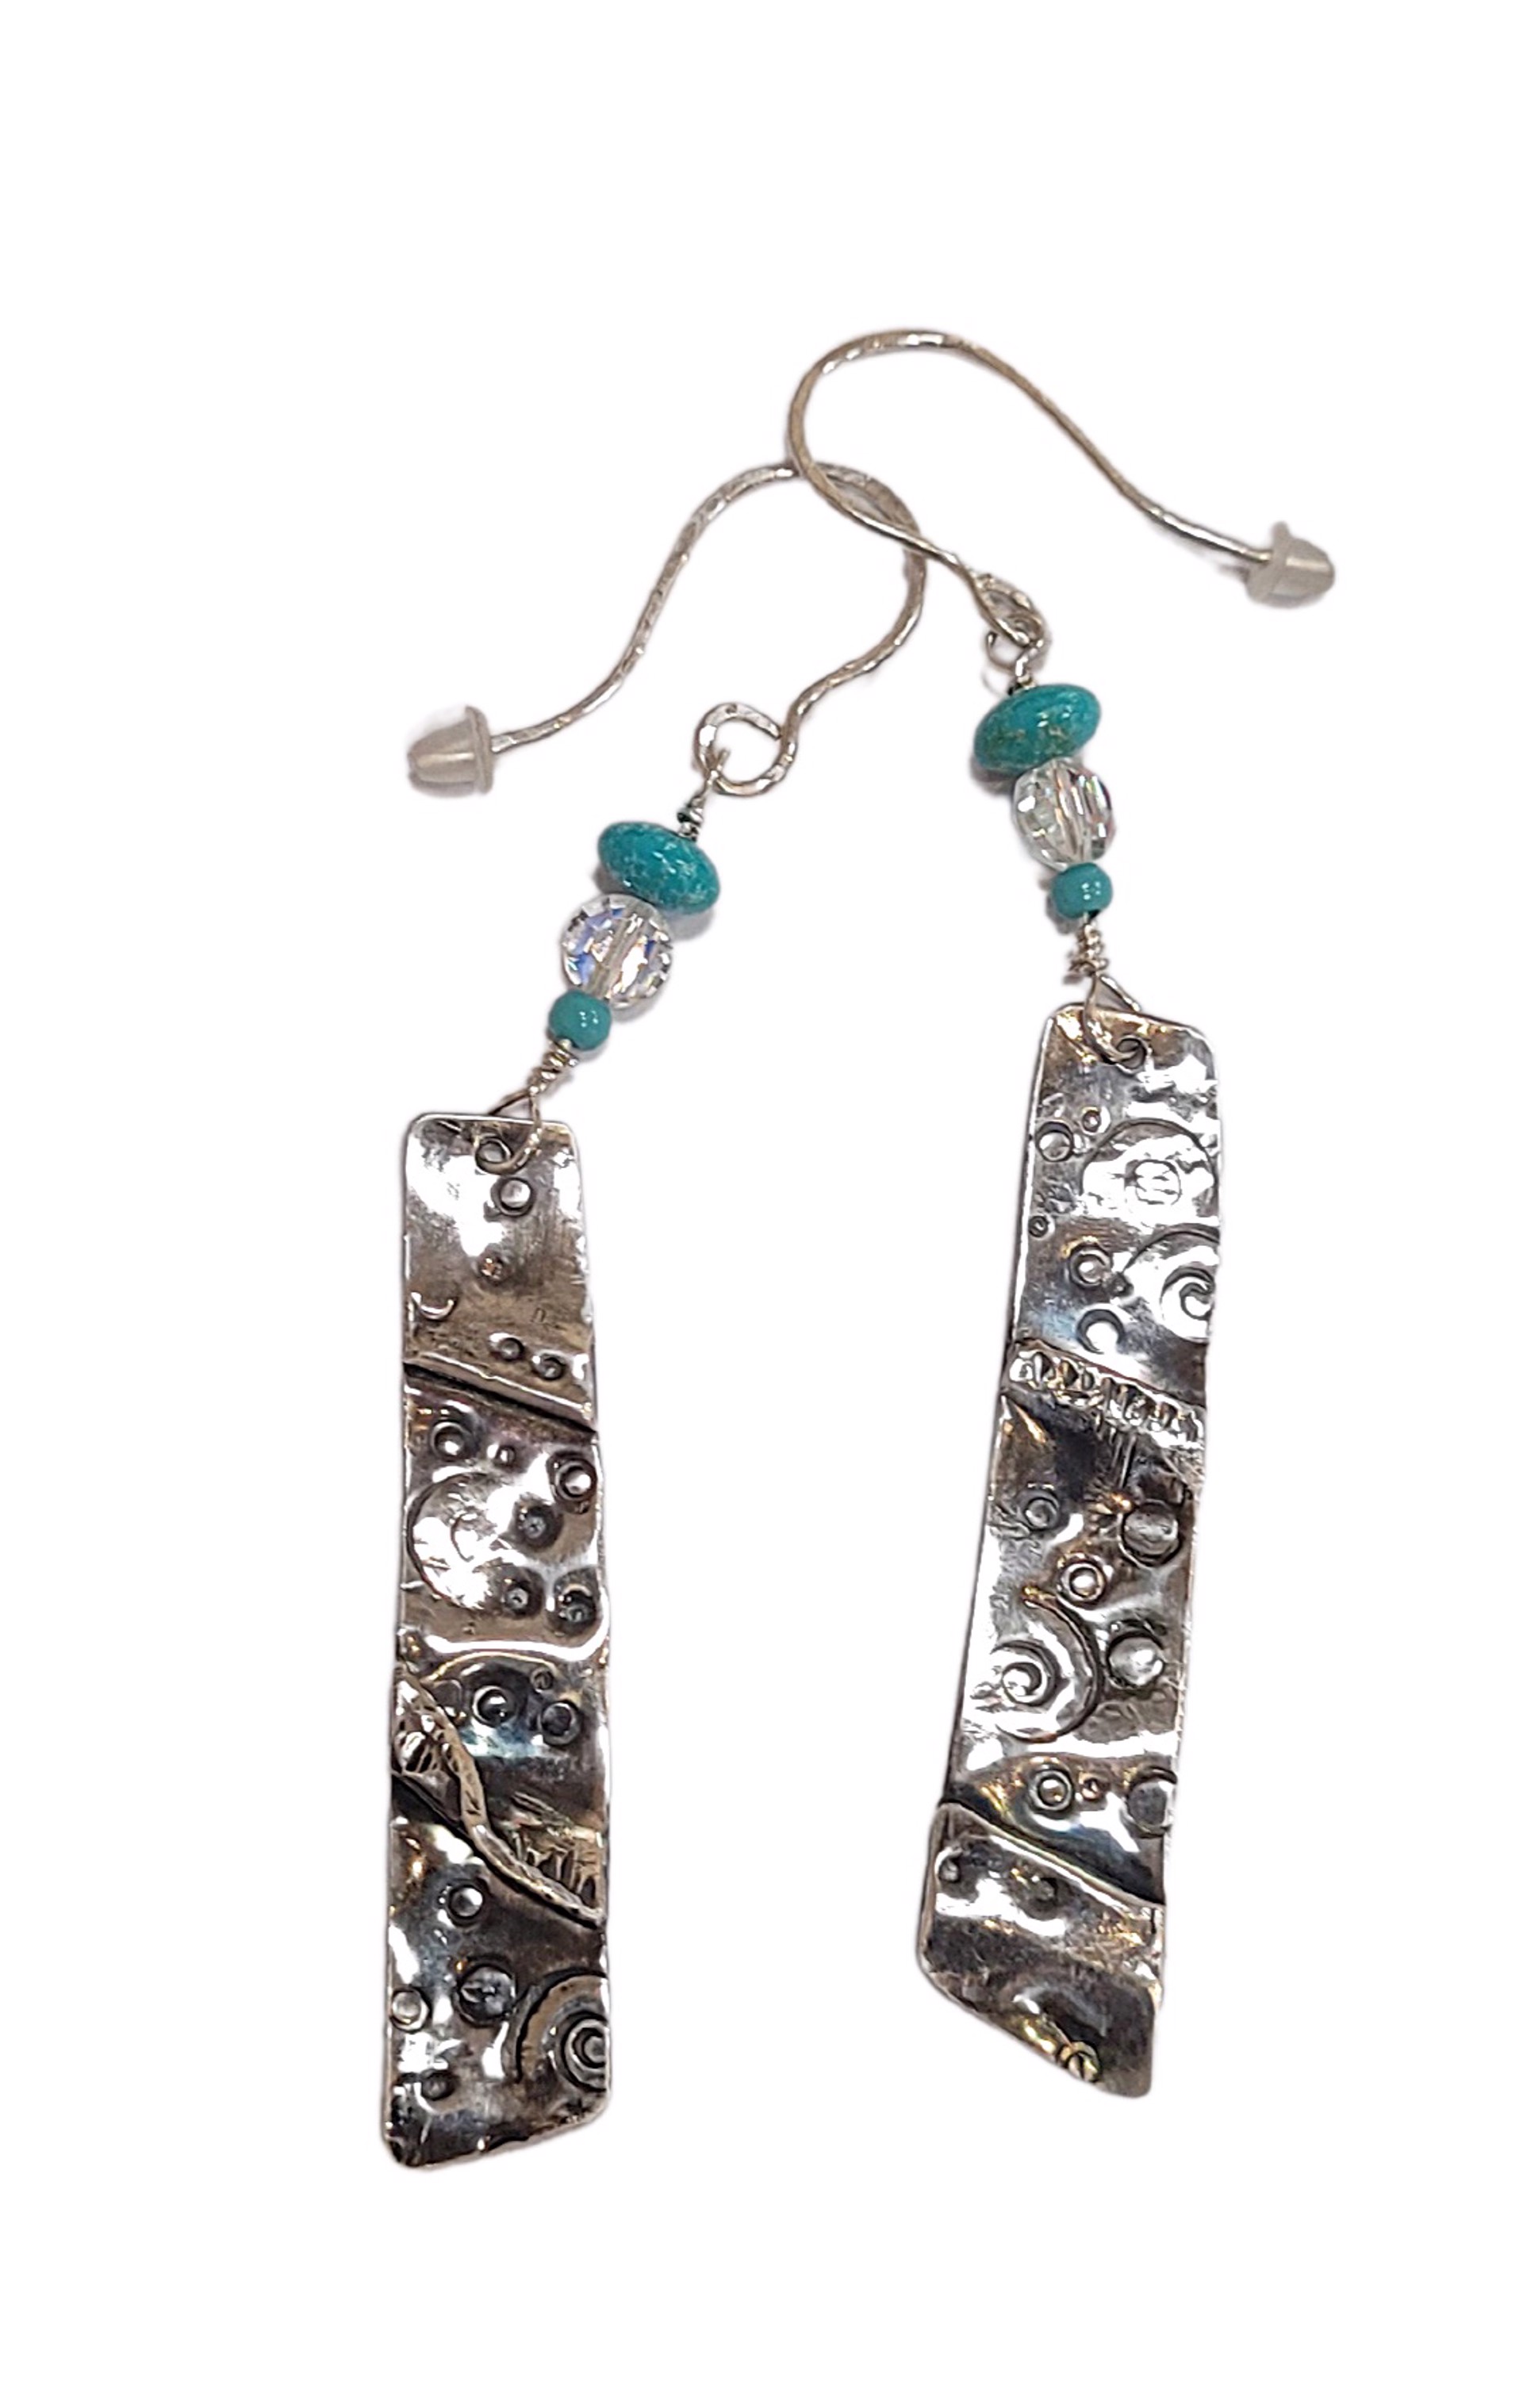 Earrings - Sterling Silver, Turquoise, and Crystal Beads DK 3028 by Doris King